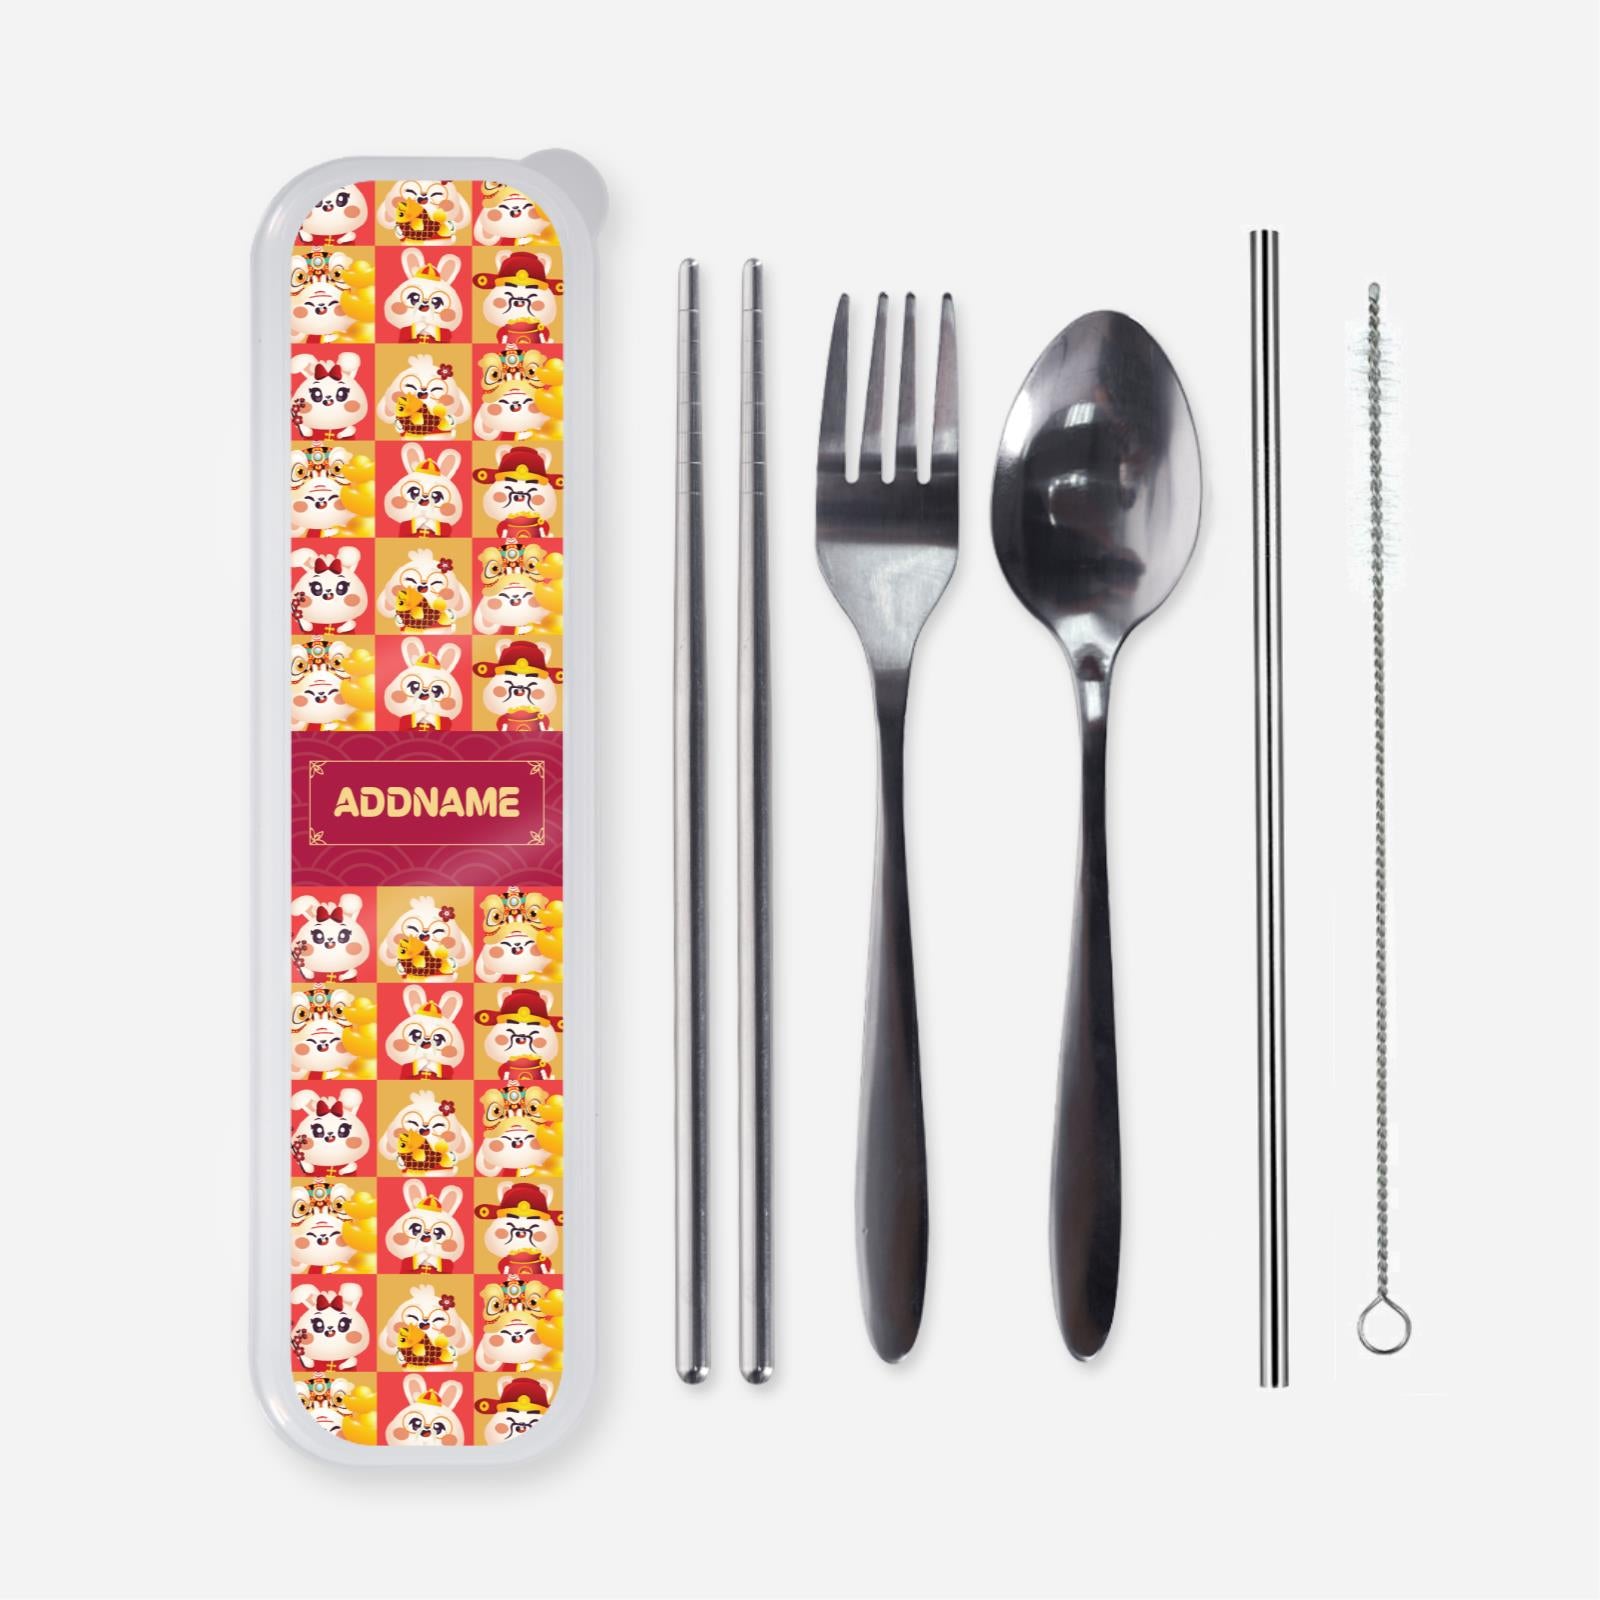 Cny Rabbit Family - Rabbit Family Red Cutlery With English Personalization